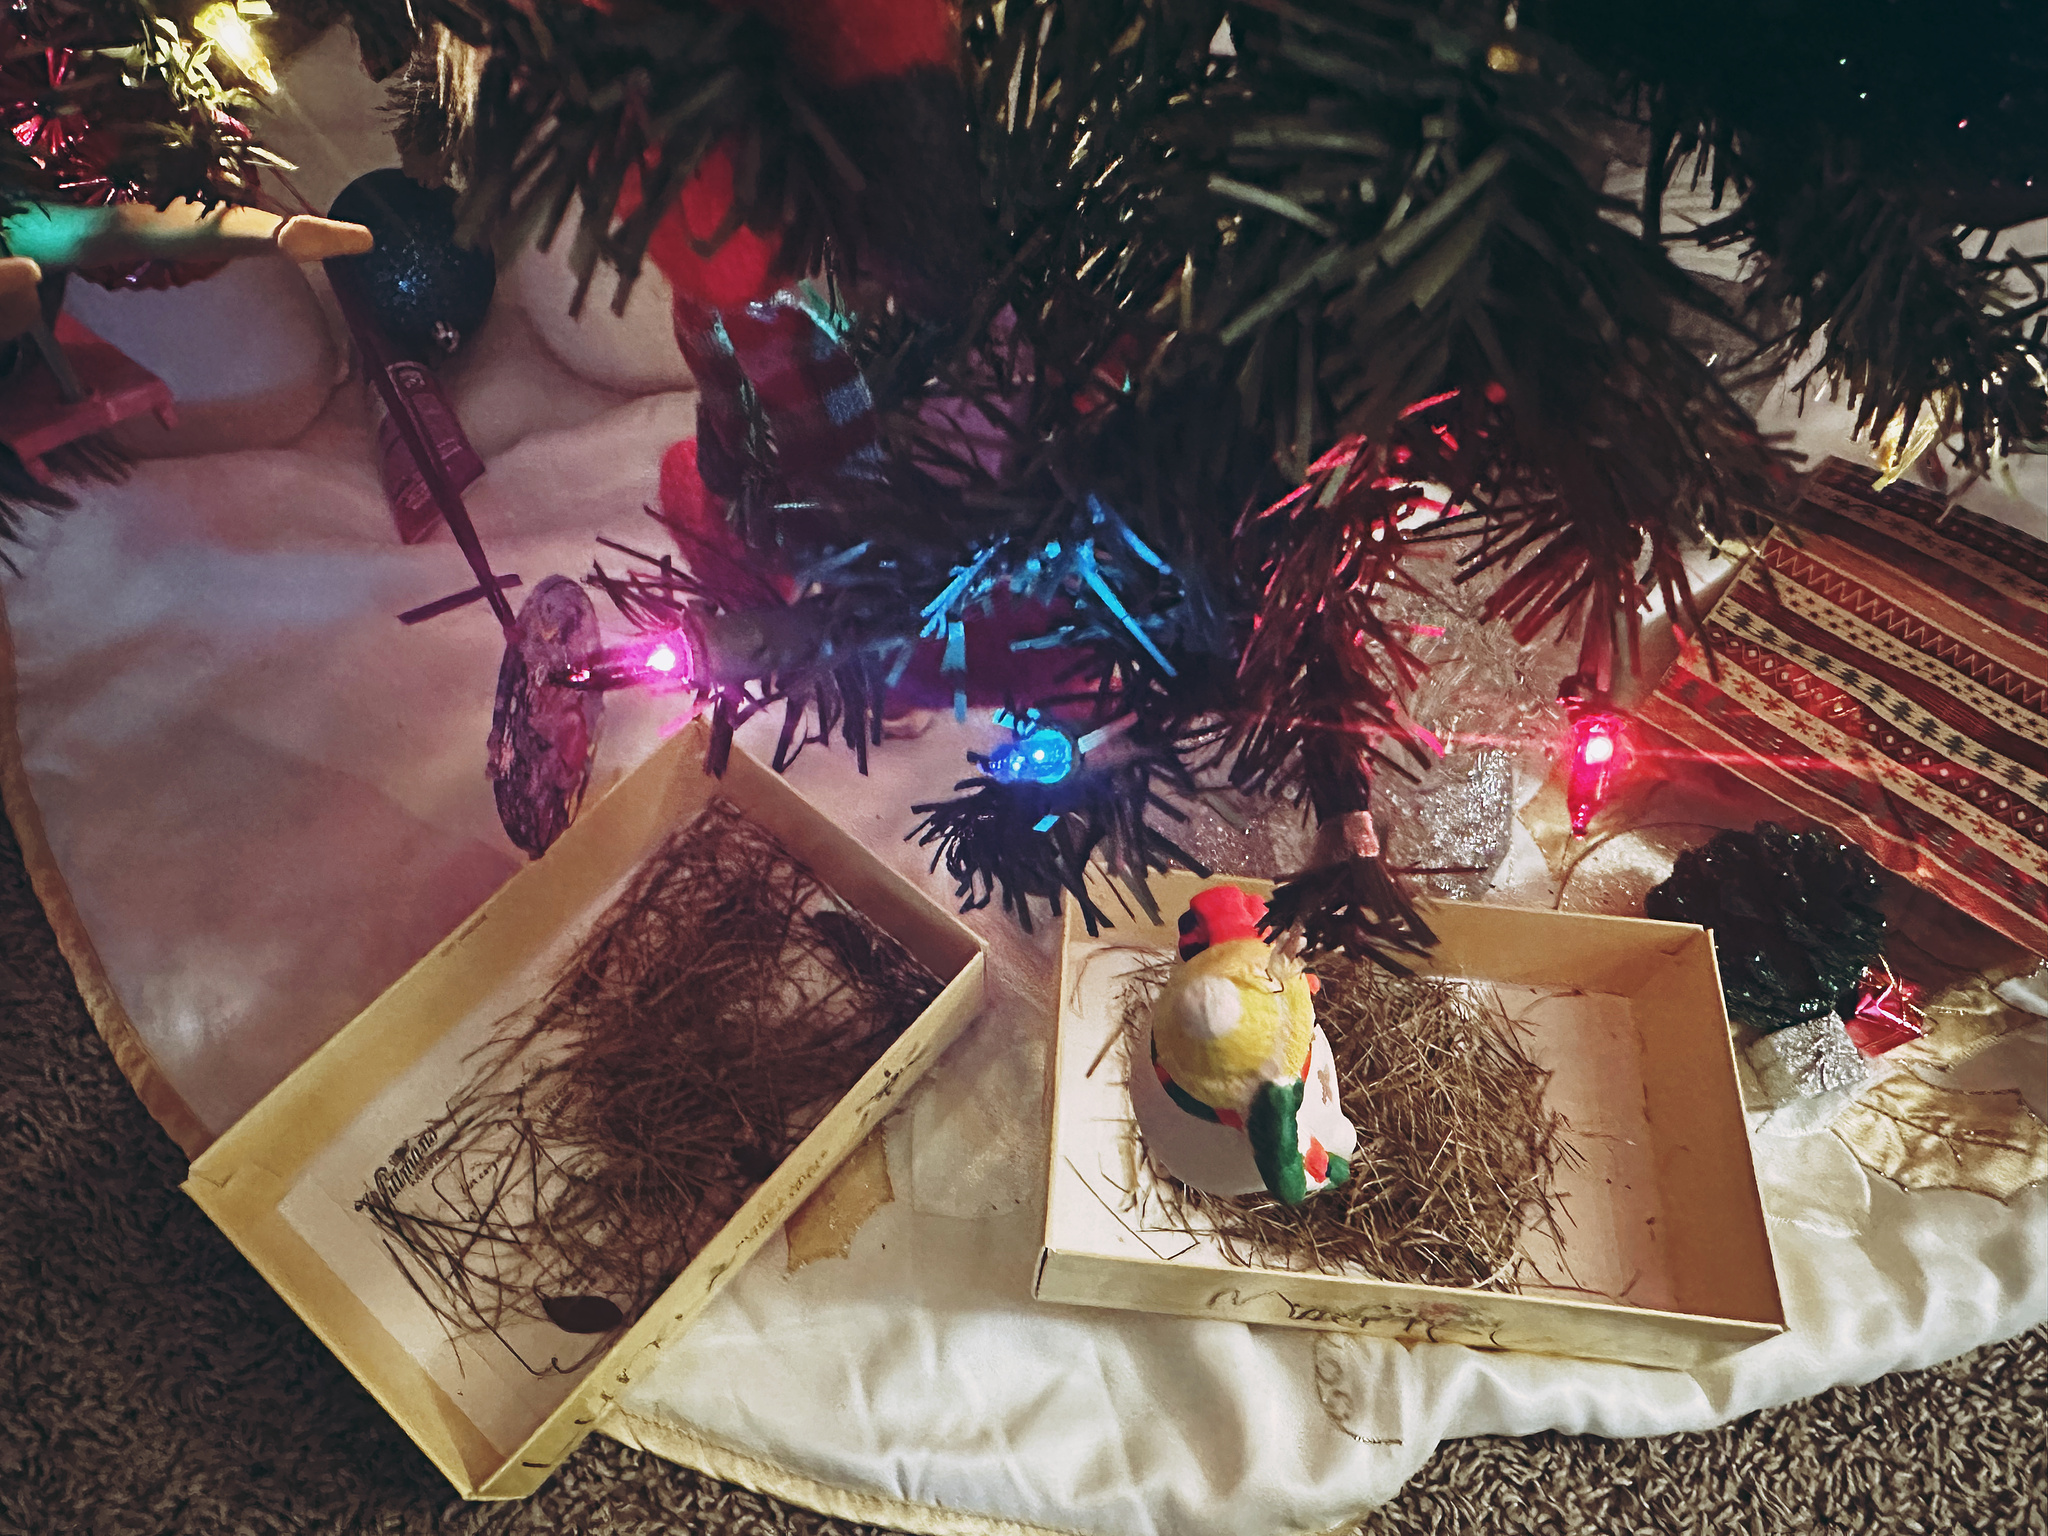 Two boxes filled with grass under the Christmas tree